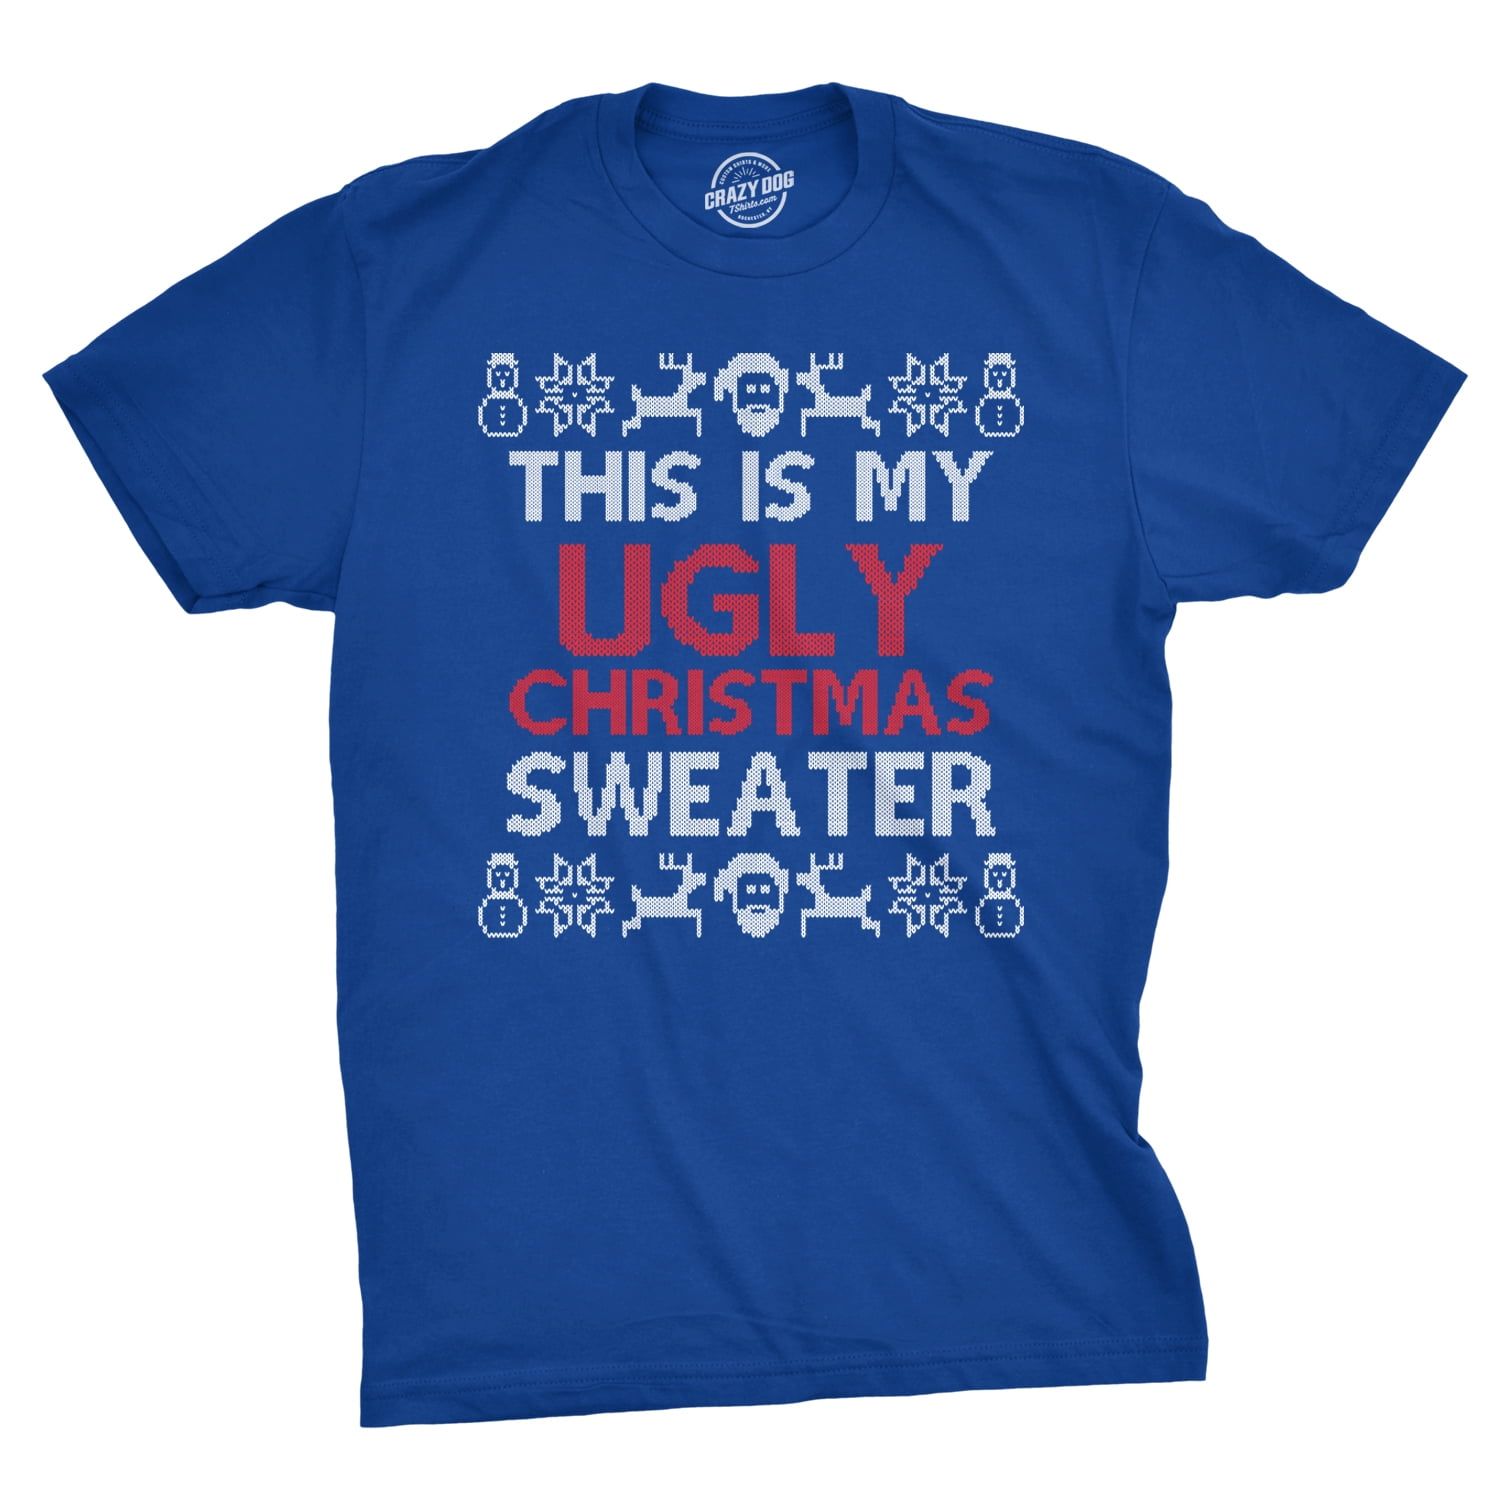 Mens This Is My Ugly Christmas Sweather Funny Holiday Xmas T shirt